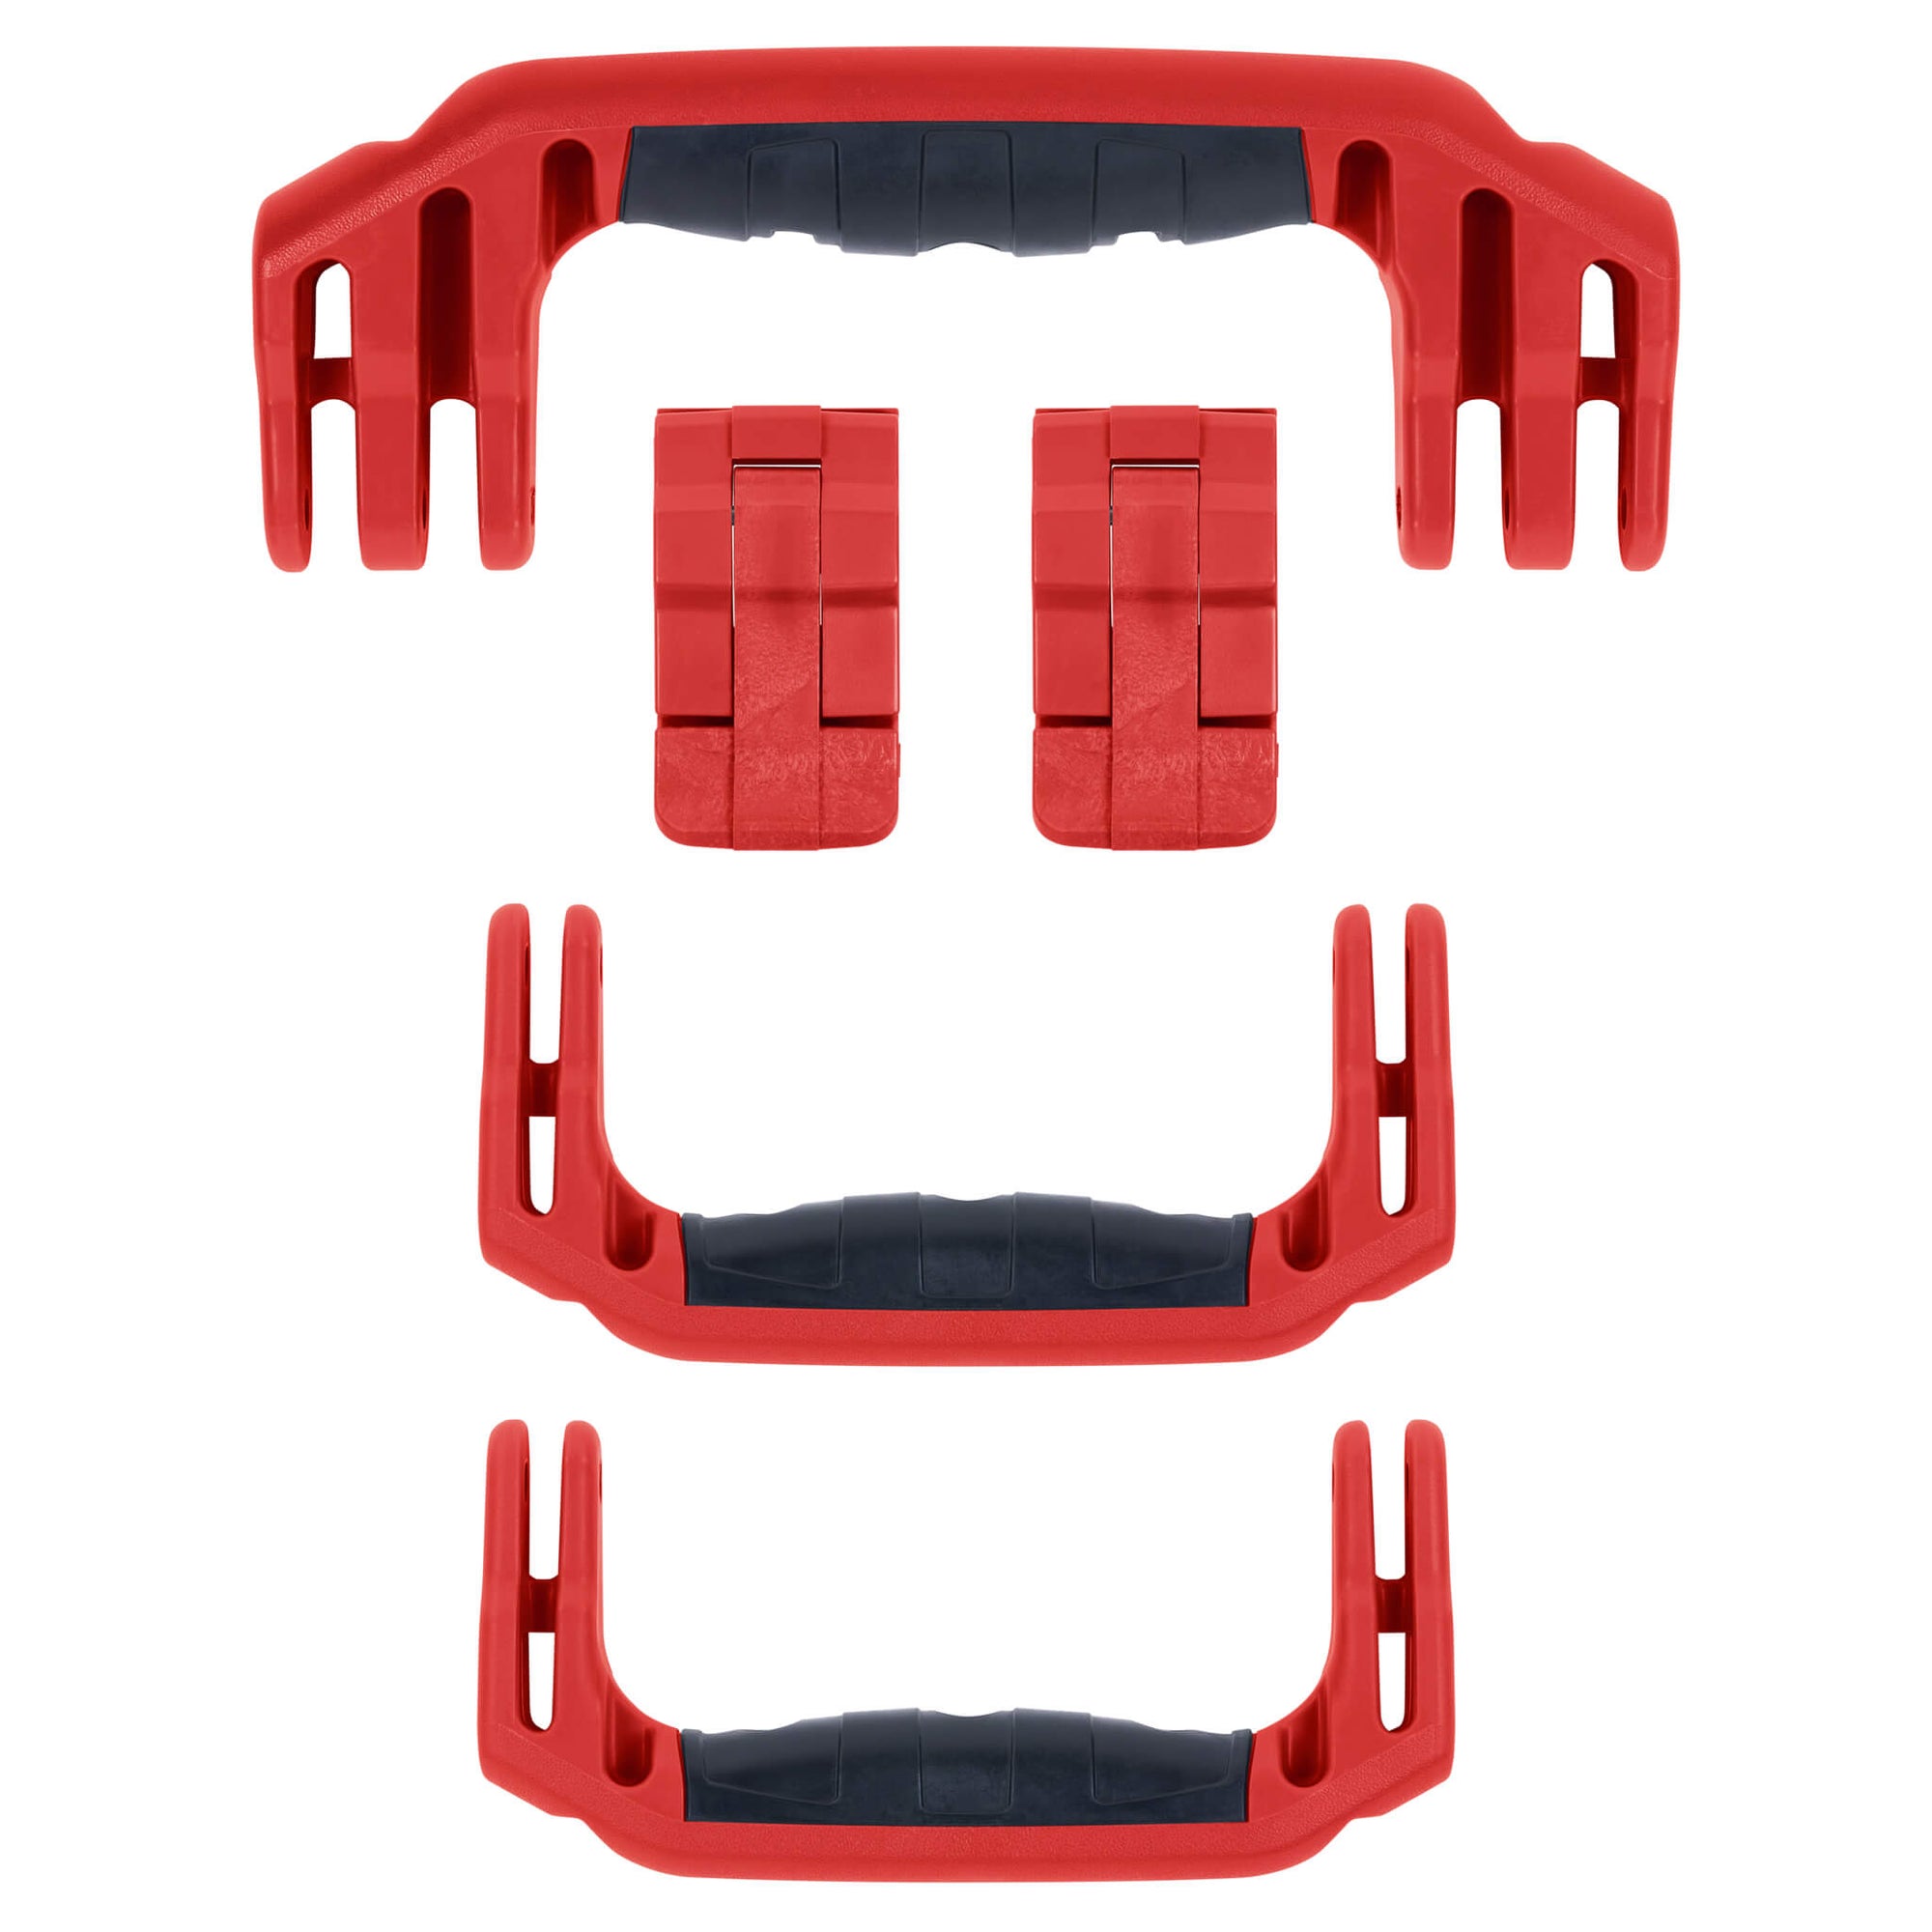 Pelican 1460 Replacement Handles & Latches, Red (Set of 3 Handles, 2 Latches) ColorCase 